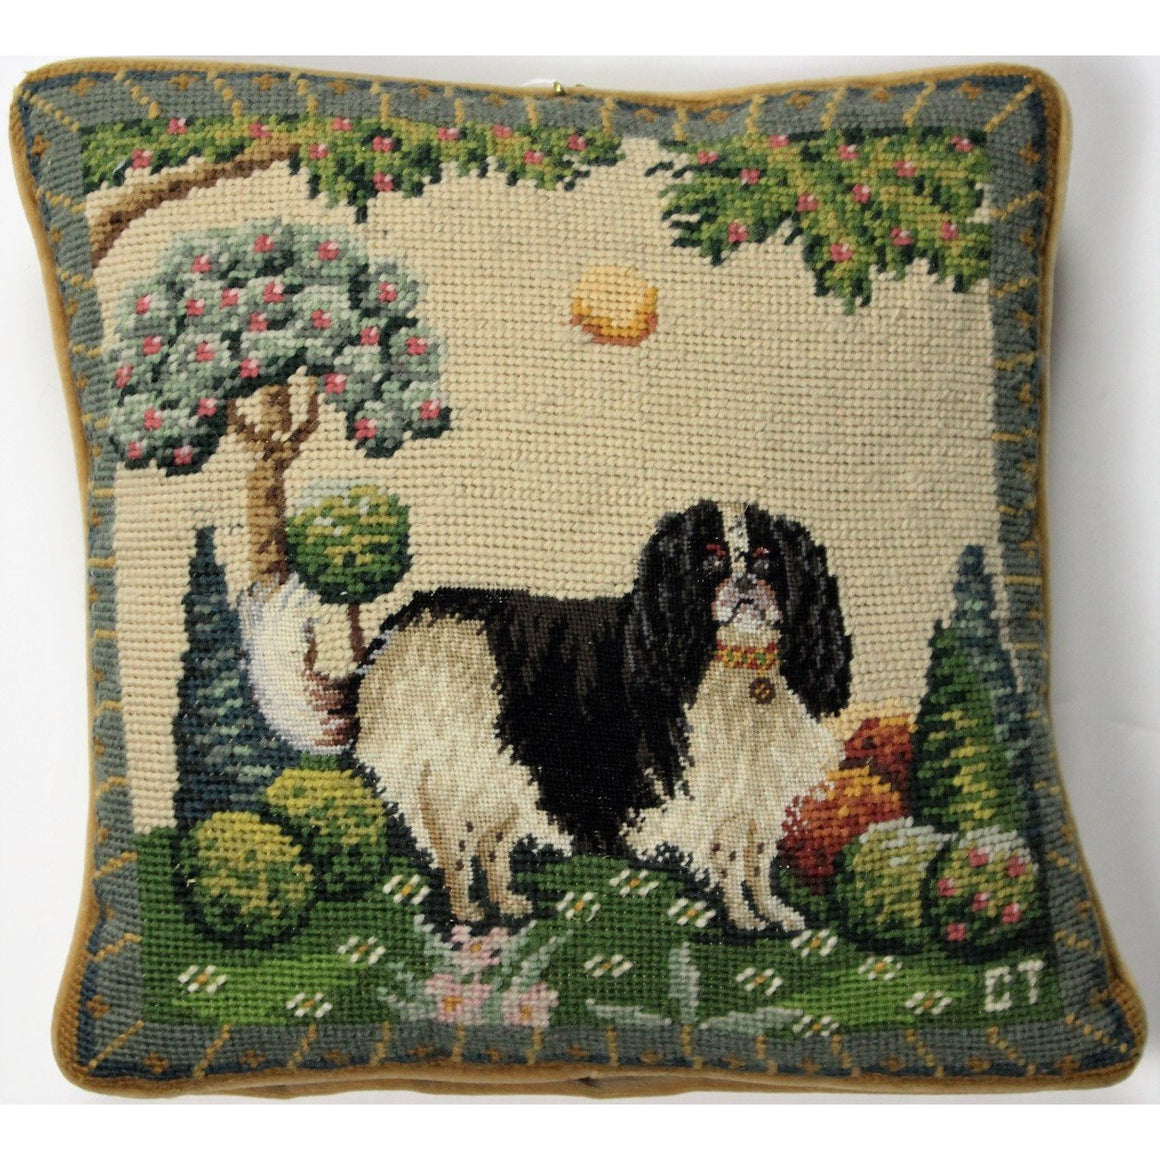 Needlepoint Cocker Spaniel by CT Needlepoint Pillow